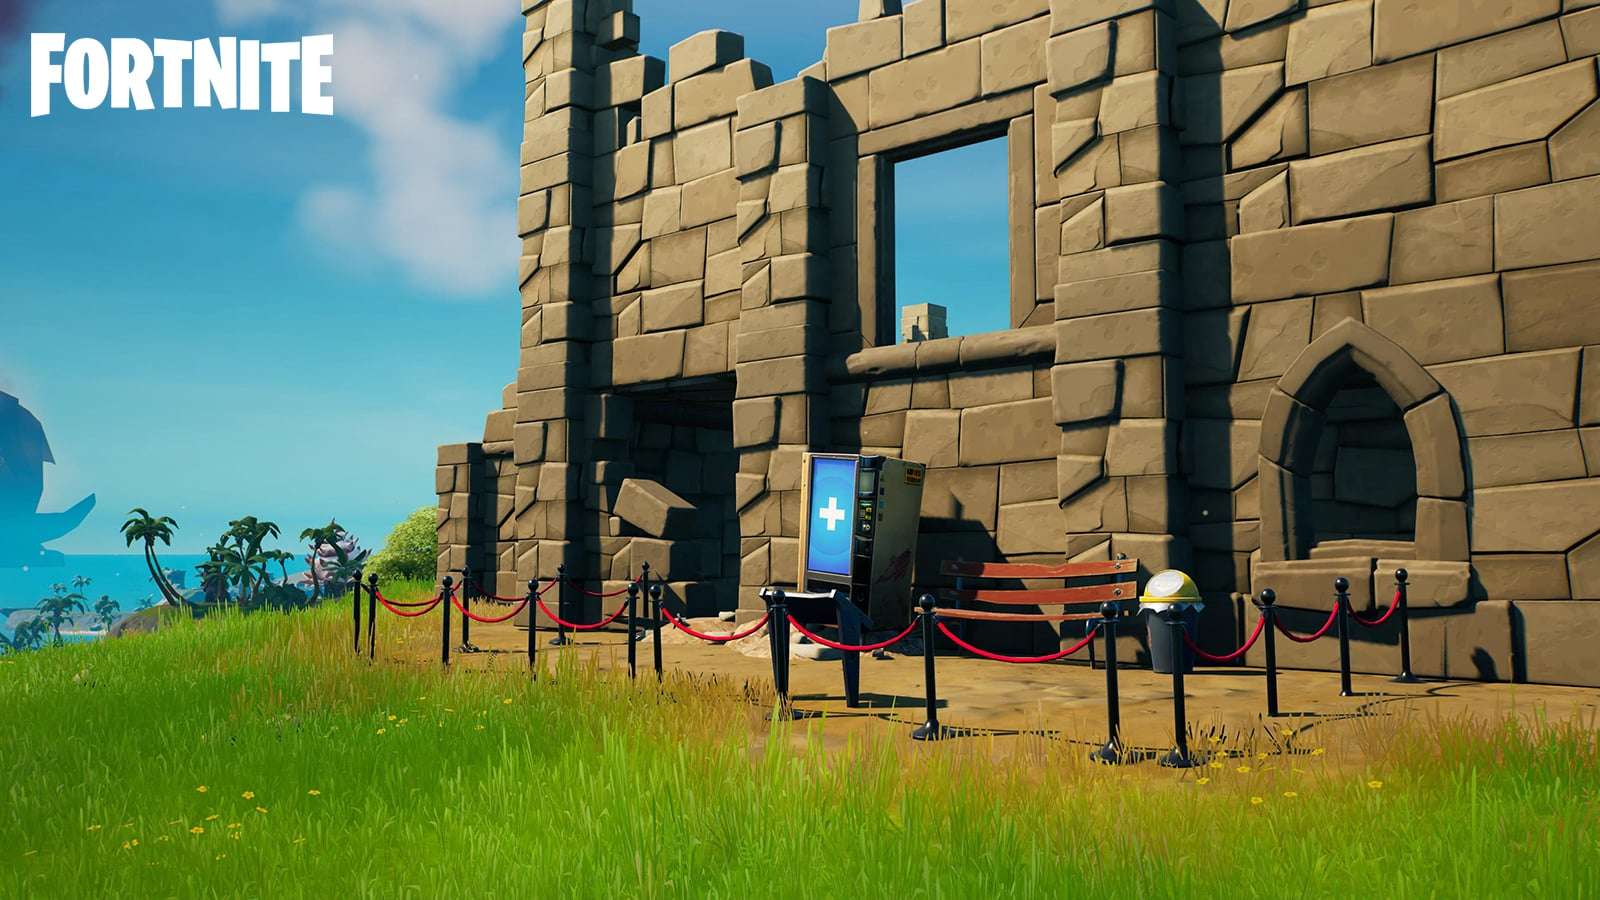 An image of Fort Crumpet in Fortnite